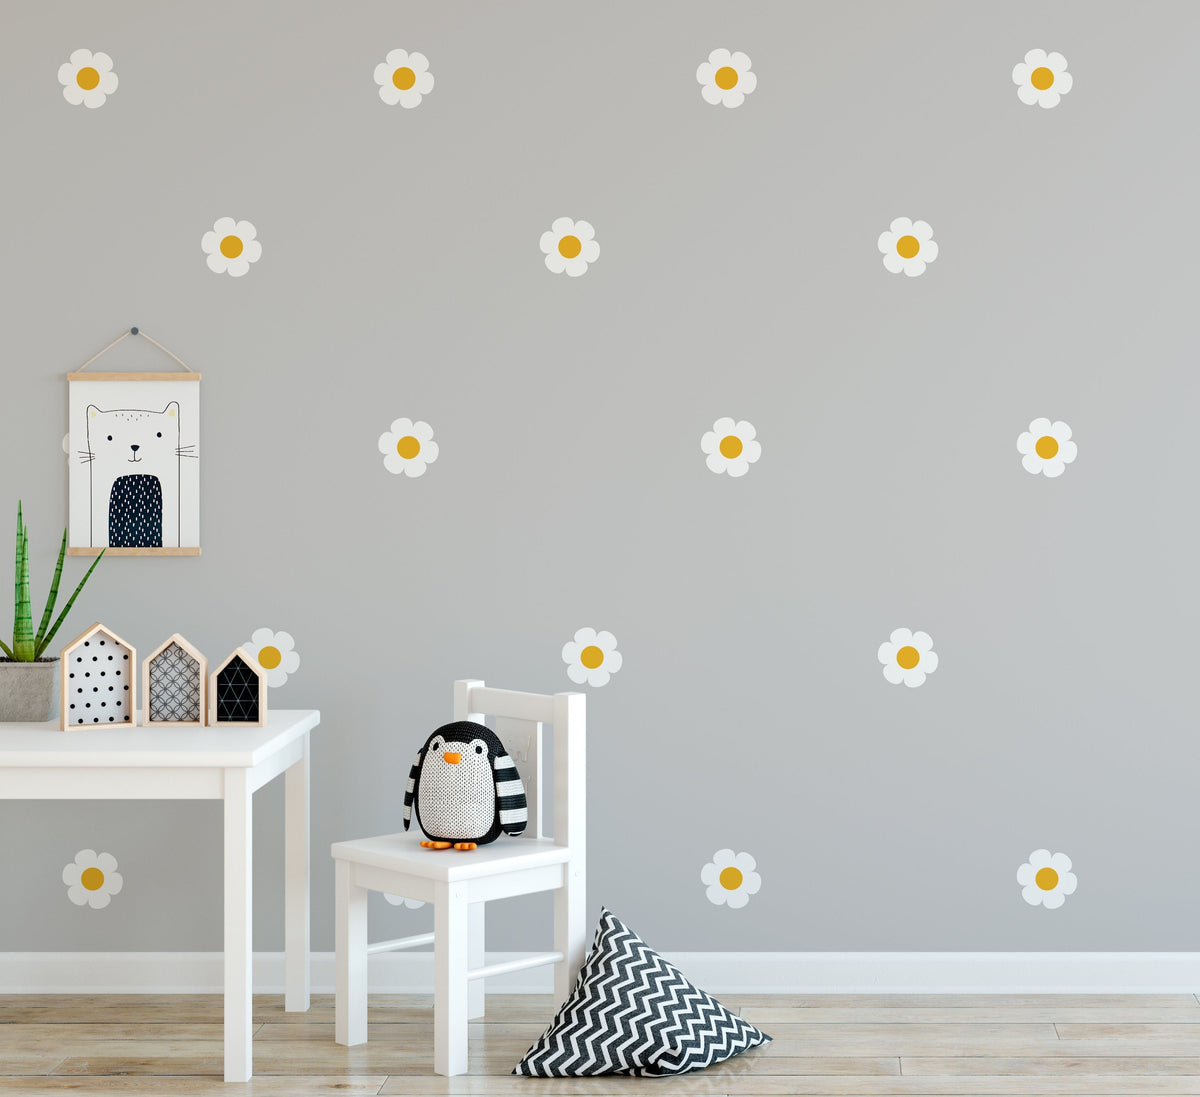 52 Daisy Flowers Floral Wall Stickers For Nursery Kids Rooms Removable Daisies Decals